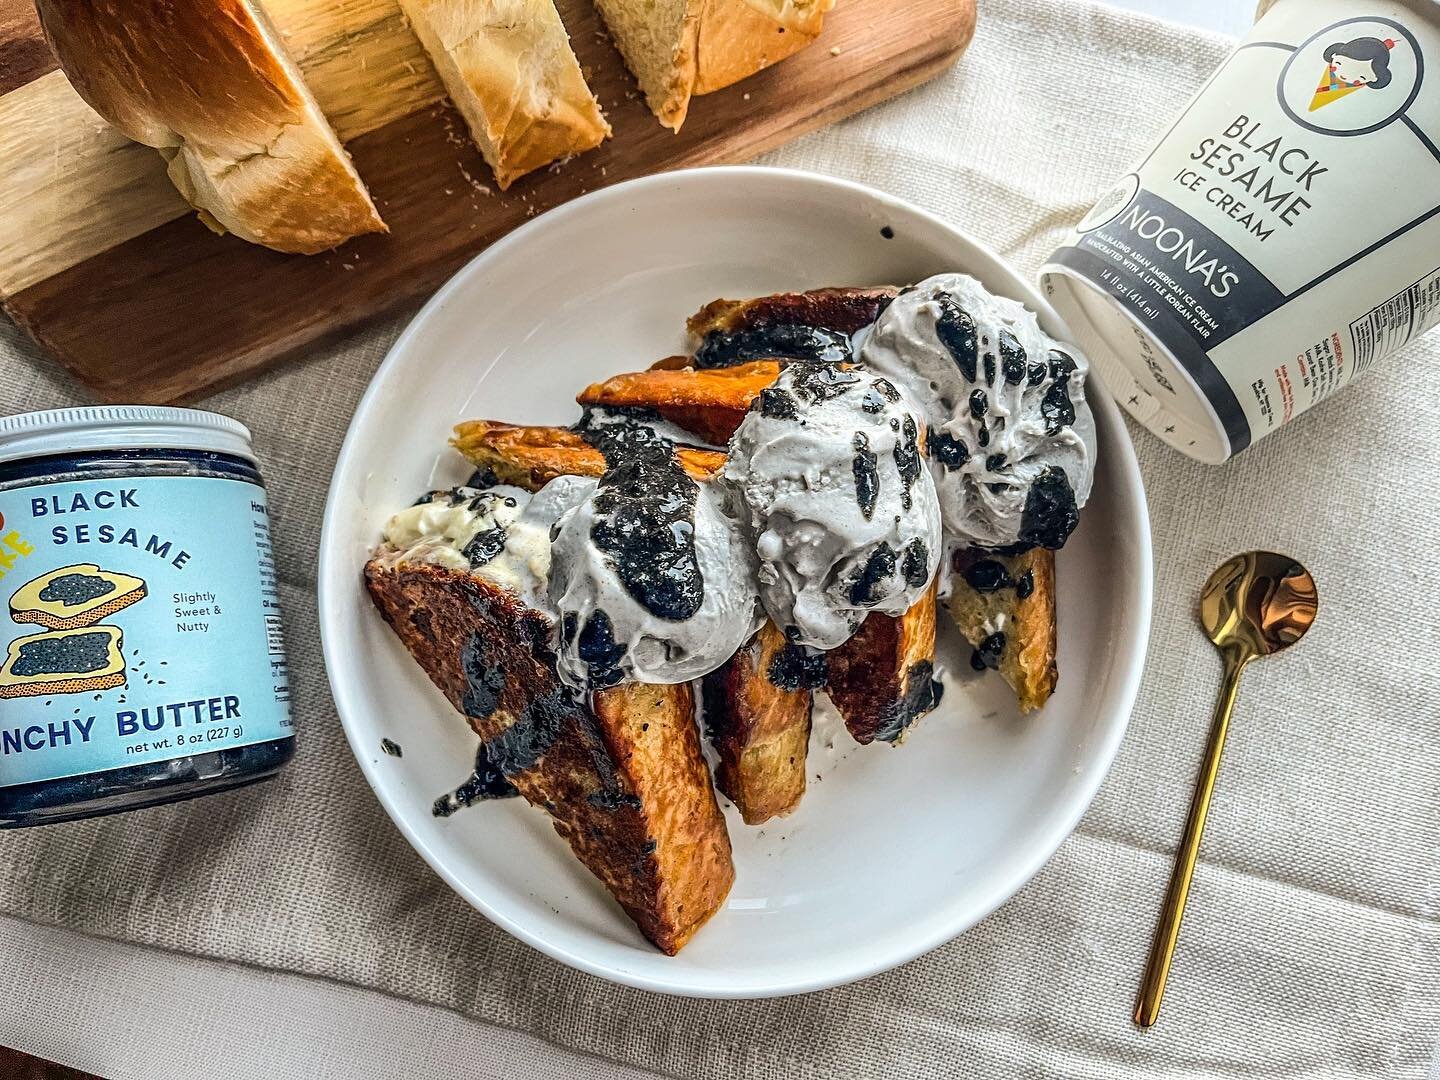 National Ice Cream for Breakfast Day is tomorrow, and we highly recommend eating ice cream for breakfast any day of the week! We&rsquo;re celebrating this fun day with french toast stuffed with lemony ricotta and topped with our Black Sesame Ice Crea